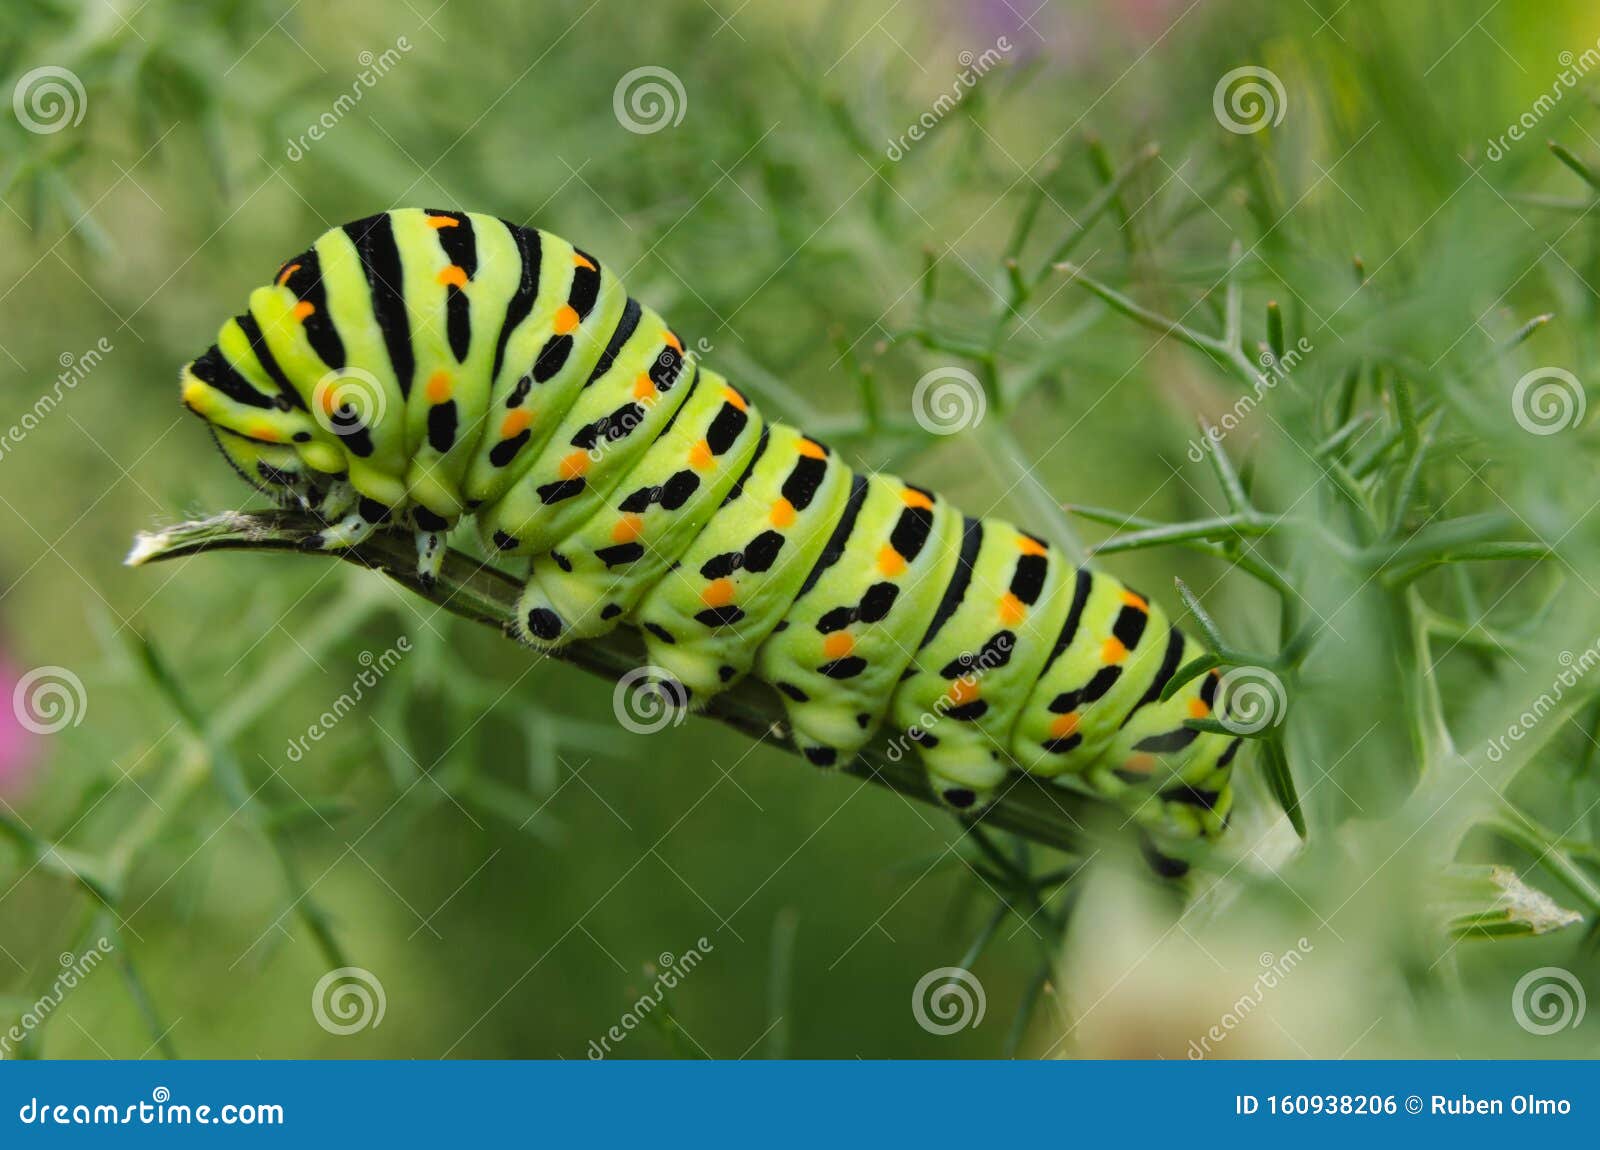 macaon butterfly caterpillar on a fennel plant